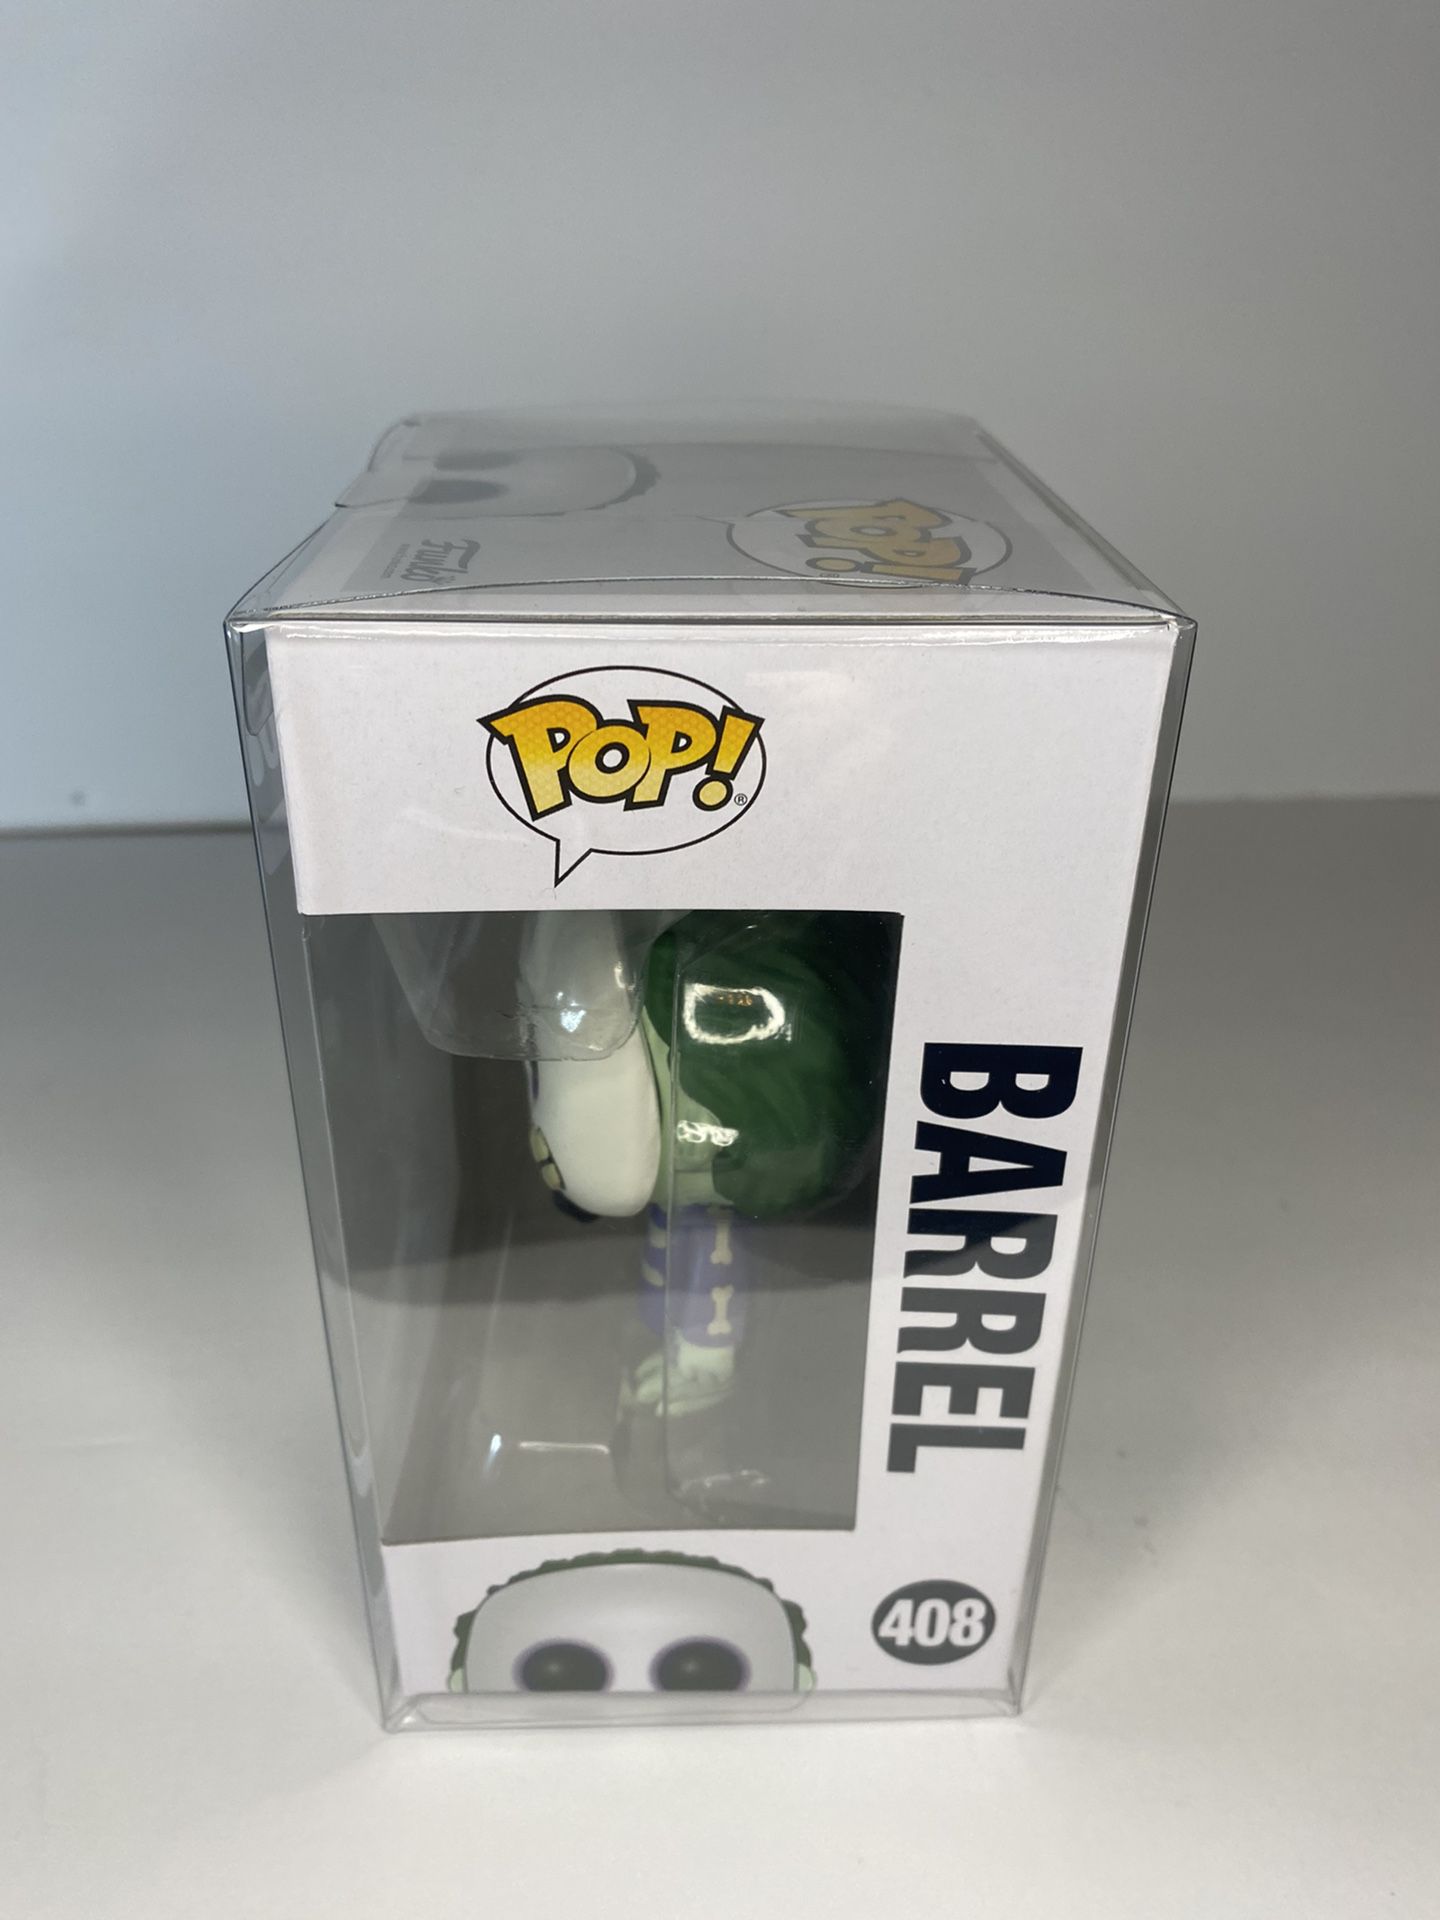 Barrel From Nightmare Before Christmas Disney Funko POP In Protective Case